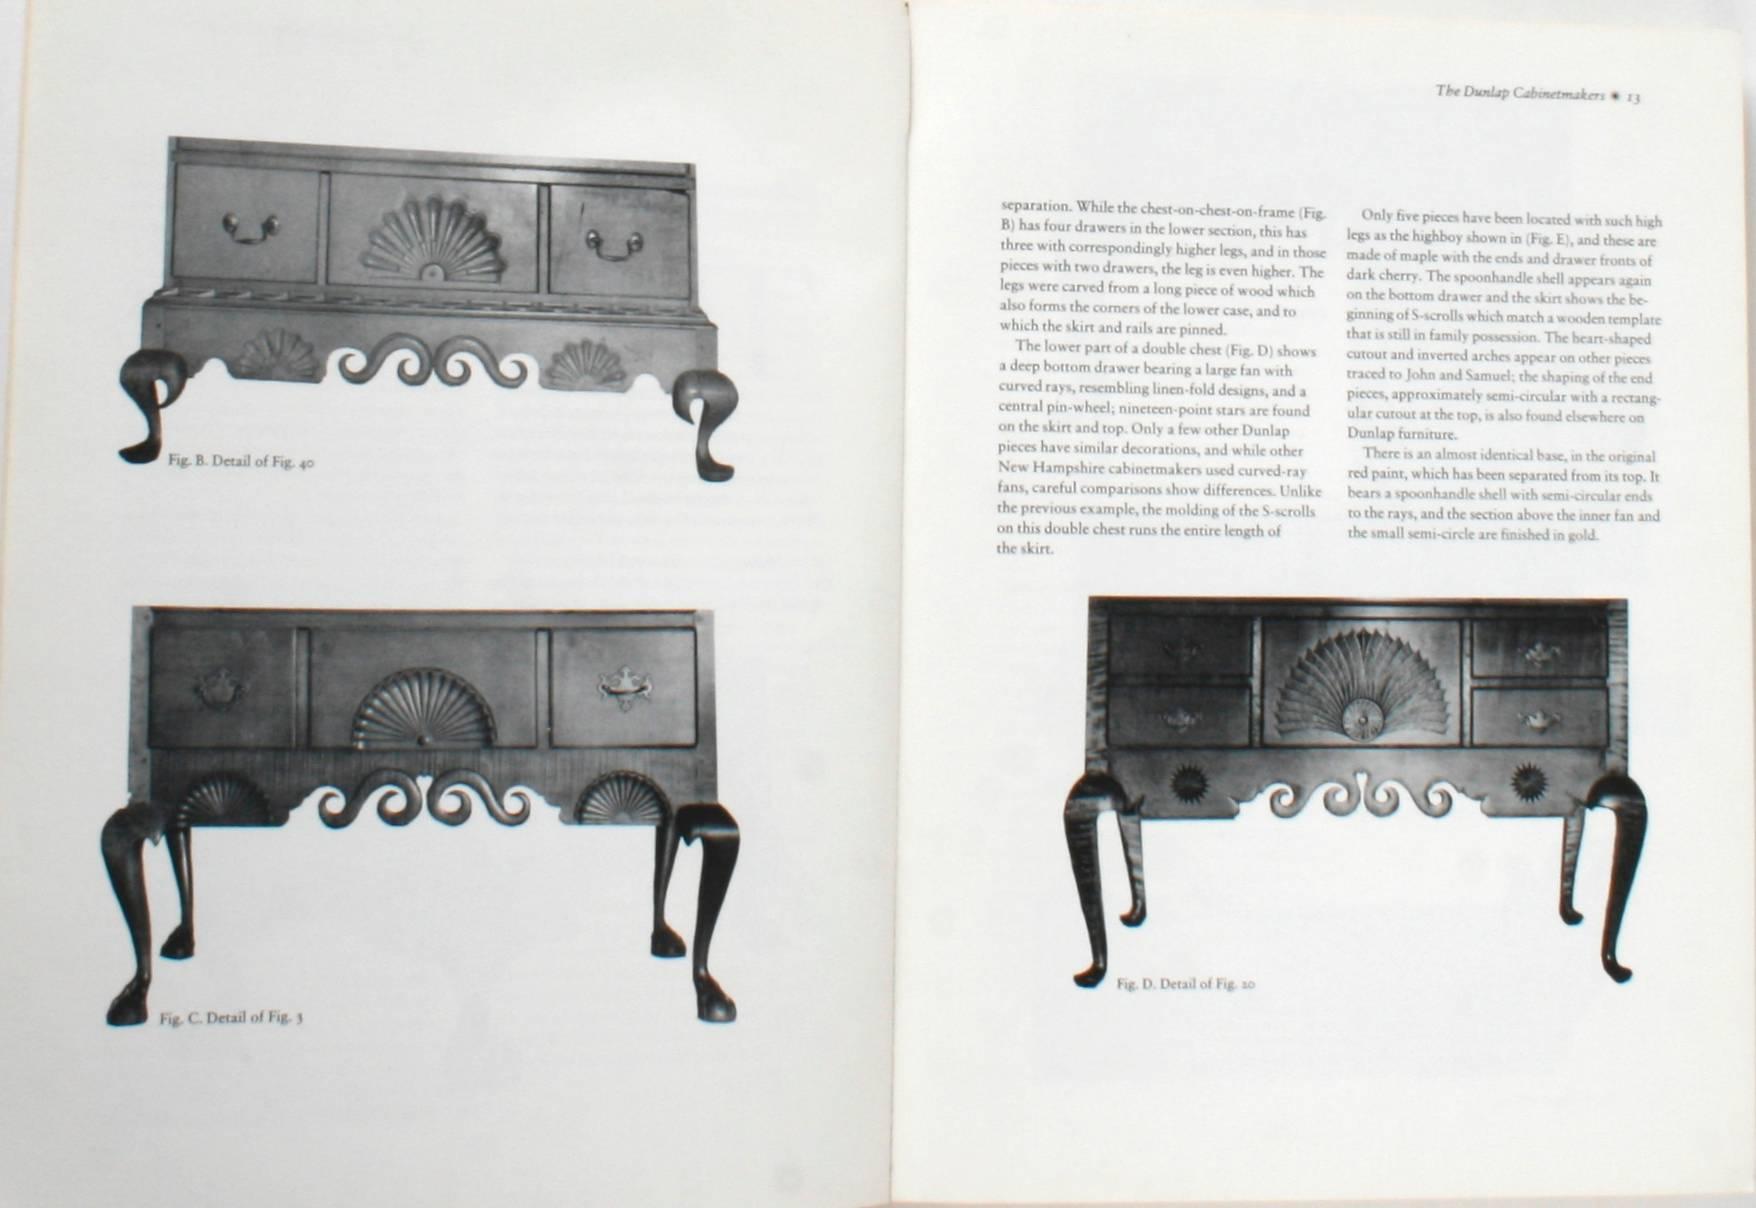 “The Dunlaps and Their Furniture”. Manchester: The Currior Gallery of Art, 1970. First edition softcover. 310 pp. An exhibition catalogue of Dunlap furniture held at the Currier Gallery of Art in Manchester New Hampshire from August 6 to September